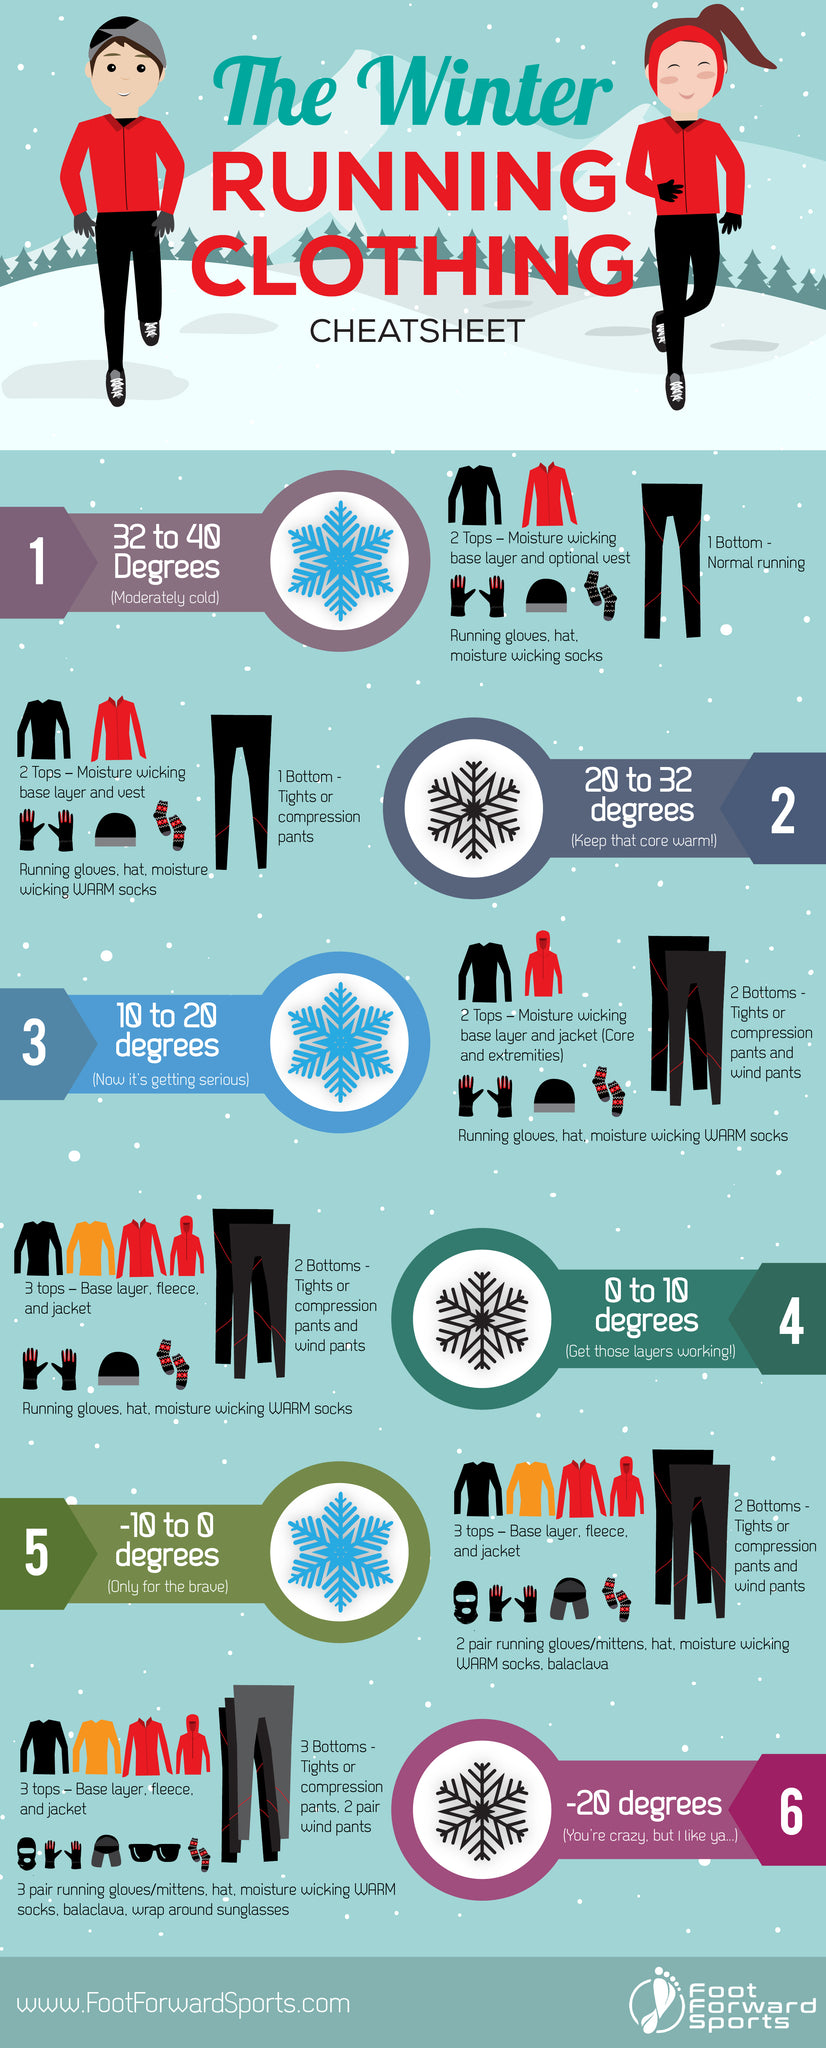 9 Tips For Cold Weather Running Success